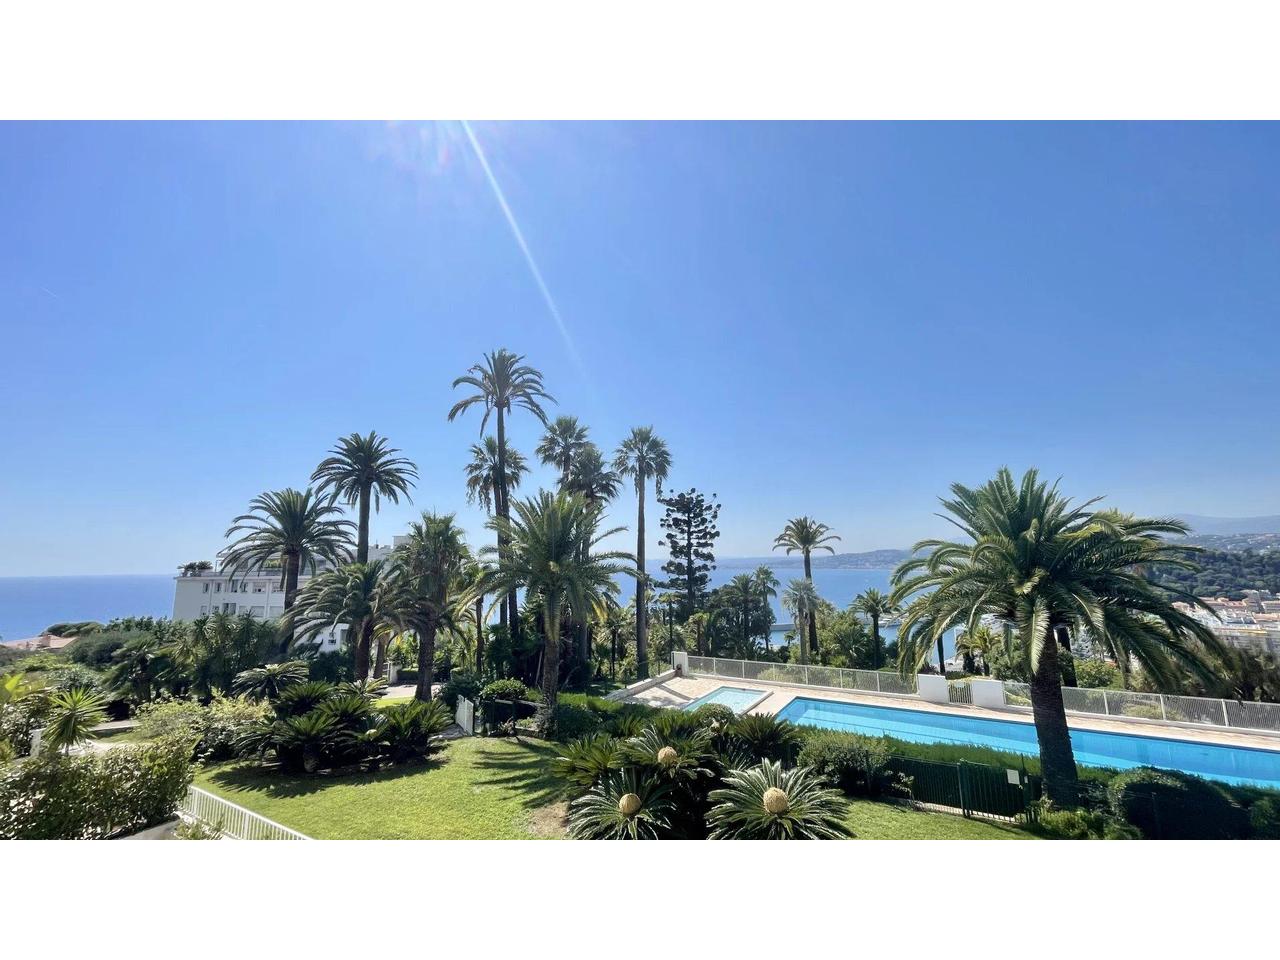 Nice Riviera - Real estate agency Nice Côte d'Azur | Appartement  3 Rooms 85m2  for sale   798 000 €